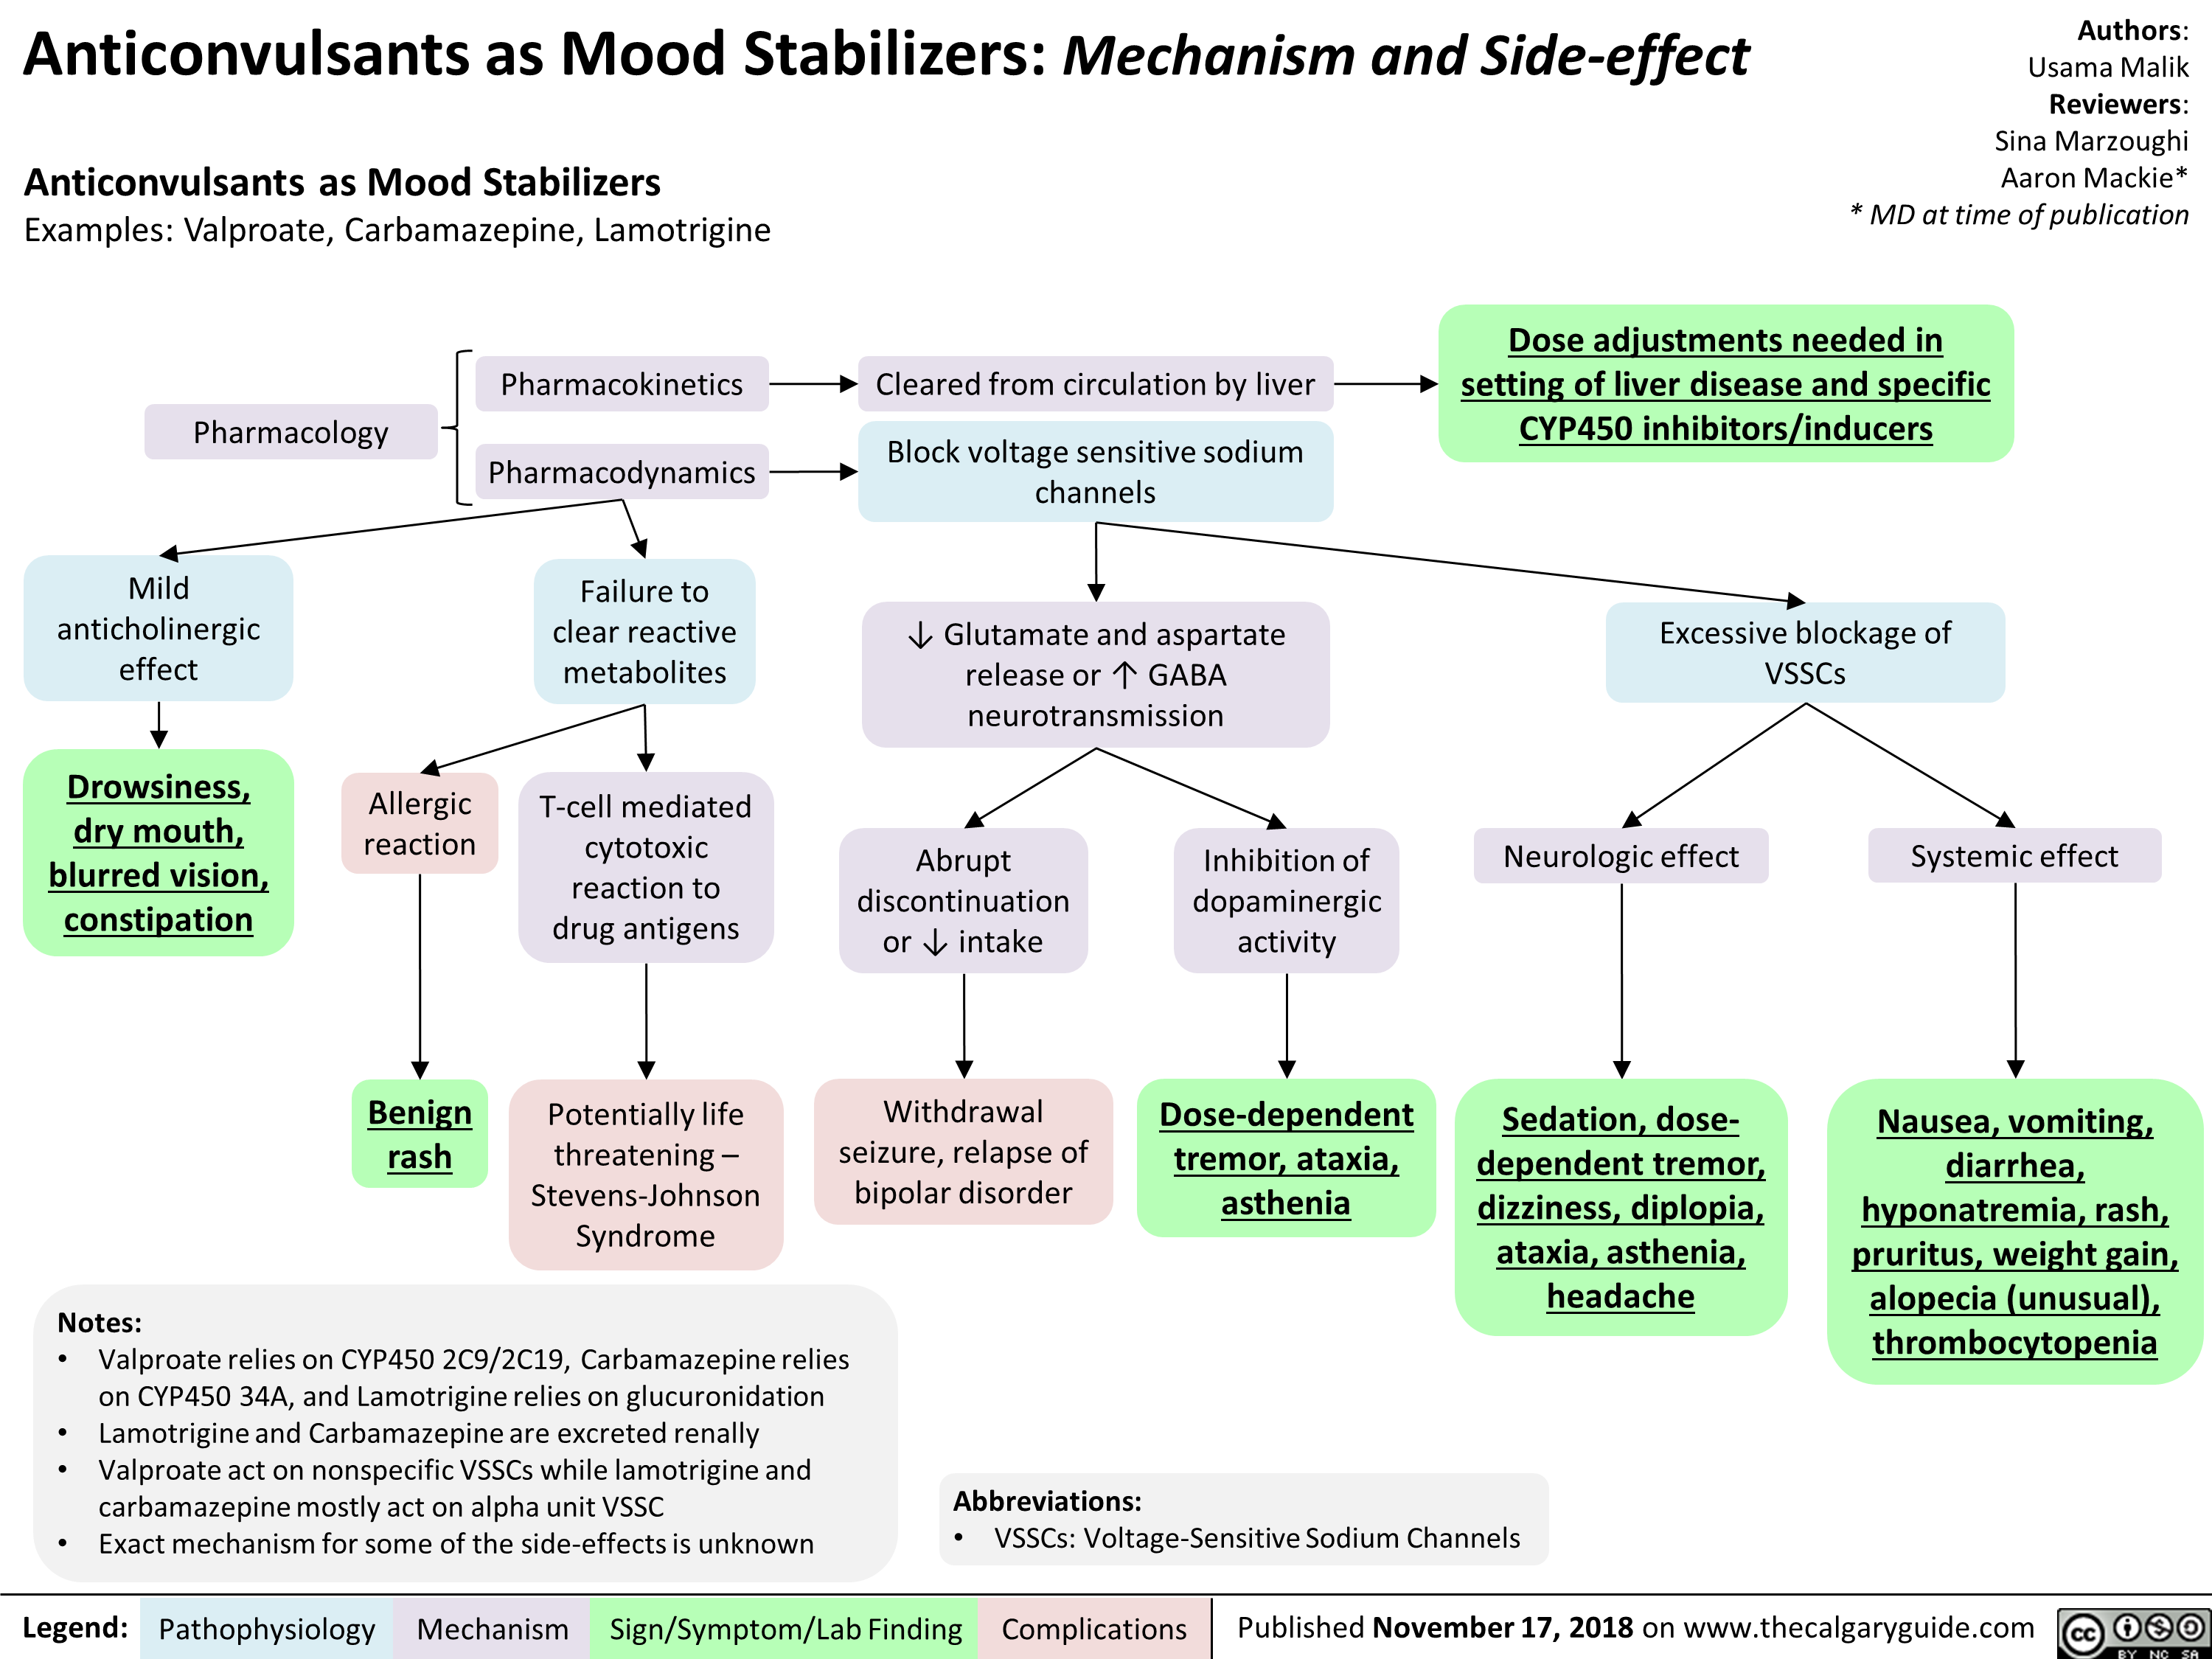 Anticonvulsants as Mood Stabilizers: Mechanism and Side-effect 
Anticonvulsants as Mood Stabilizers Examples: Valproate, Carbamazepine, Lamotrigine 
Pharmacology 
Mild anticholinergic effect 
Drowsiness,  dry mouth,  blurred vision, constipation  
Allergic reaction 
Benign  rash 
Pharmacokinetics —■ Cleared from circulation by liver —■ 
Pharmacodynamics Block voltage sensitive sodium channels 
Failure to clear reactive metabolites 
• T-cell mediated cytotoxic reaction to drug antigens Potentially life threatening –Stevens-Johnson Syndrome 
• NI, Glutamate and aspartate release or I` GABA neurotransmission 
Authors: Usama Malik Reviewers: Sina Marzoughi Aaron Mackie* * MD at time of publication 
Dose adjustments needed in  setting of liver disease and specific CYP450 inhibitors/inducers  
Excessive blockage of VSSCs 
Abrupt discontinuation or 4, intake Inhibition of dopaminergic activity Neurologic effect Systemic effect 1 1 • 
Withdrawal seizure, relapse of bipolar disorder 
Notes: • Valproate relies on CYP450 2C9/2C19, Carbamazepine relies on CYP450 34A, and Lamotrigine relies on glucuronidation • Lamotrigine and Carbamazepine are excreted renally • Valproate act on nonspecific VSSCs while lamotrigine and carbamazepine mostly act on alpha unit VSSC • Exact mechanism for some of the side-effects is unknown 
Legend: Pathophysiology Mechanism 
Dose-dependent tremor, ataxia,  asthenia  
Sedation, dose-Nausea, vomiting, dependent tremor, diarrhea, dizziness, diplopia, hyponatremia, rash, ataxia, asthenia, pruritus, weight gain, headache alopecia (unusual), thrombocytopenia 
Abbreviations: • VSSCs: Voltage-Sensitive Sodium Channels 